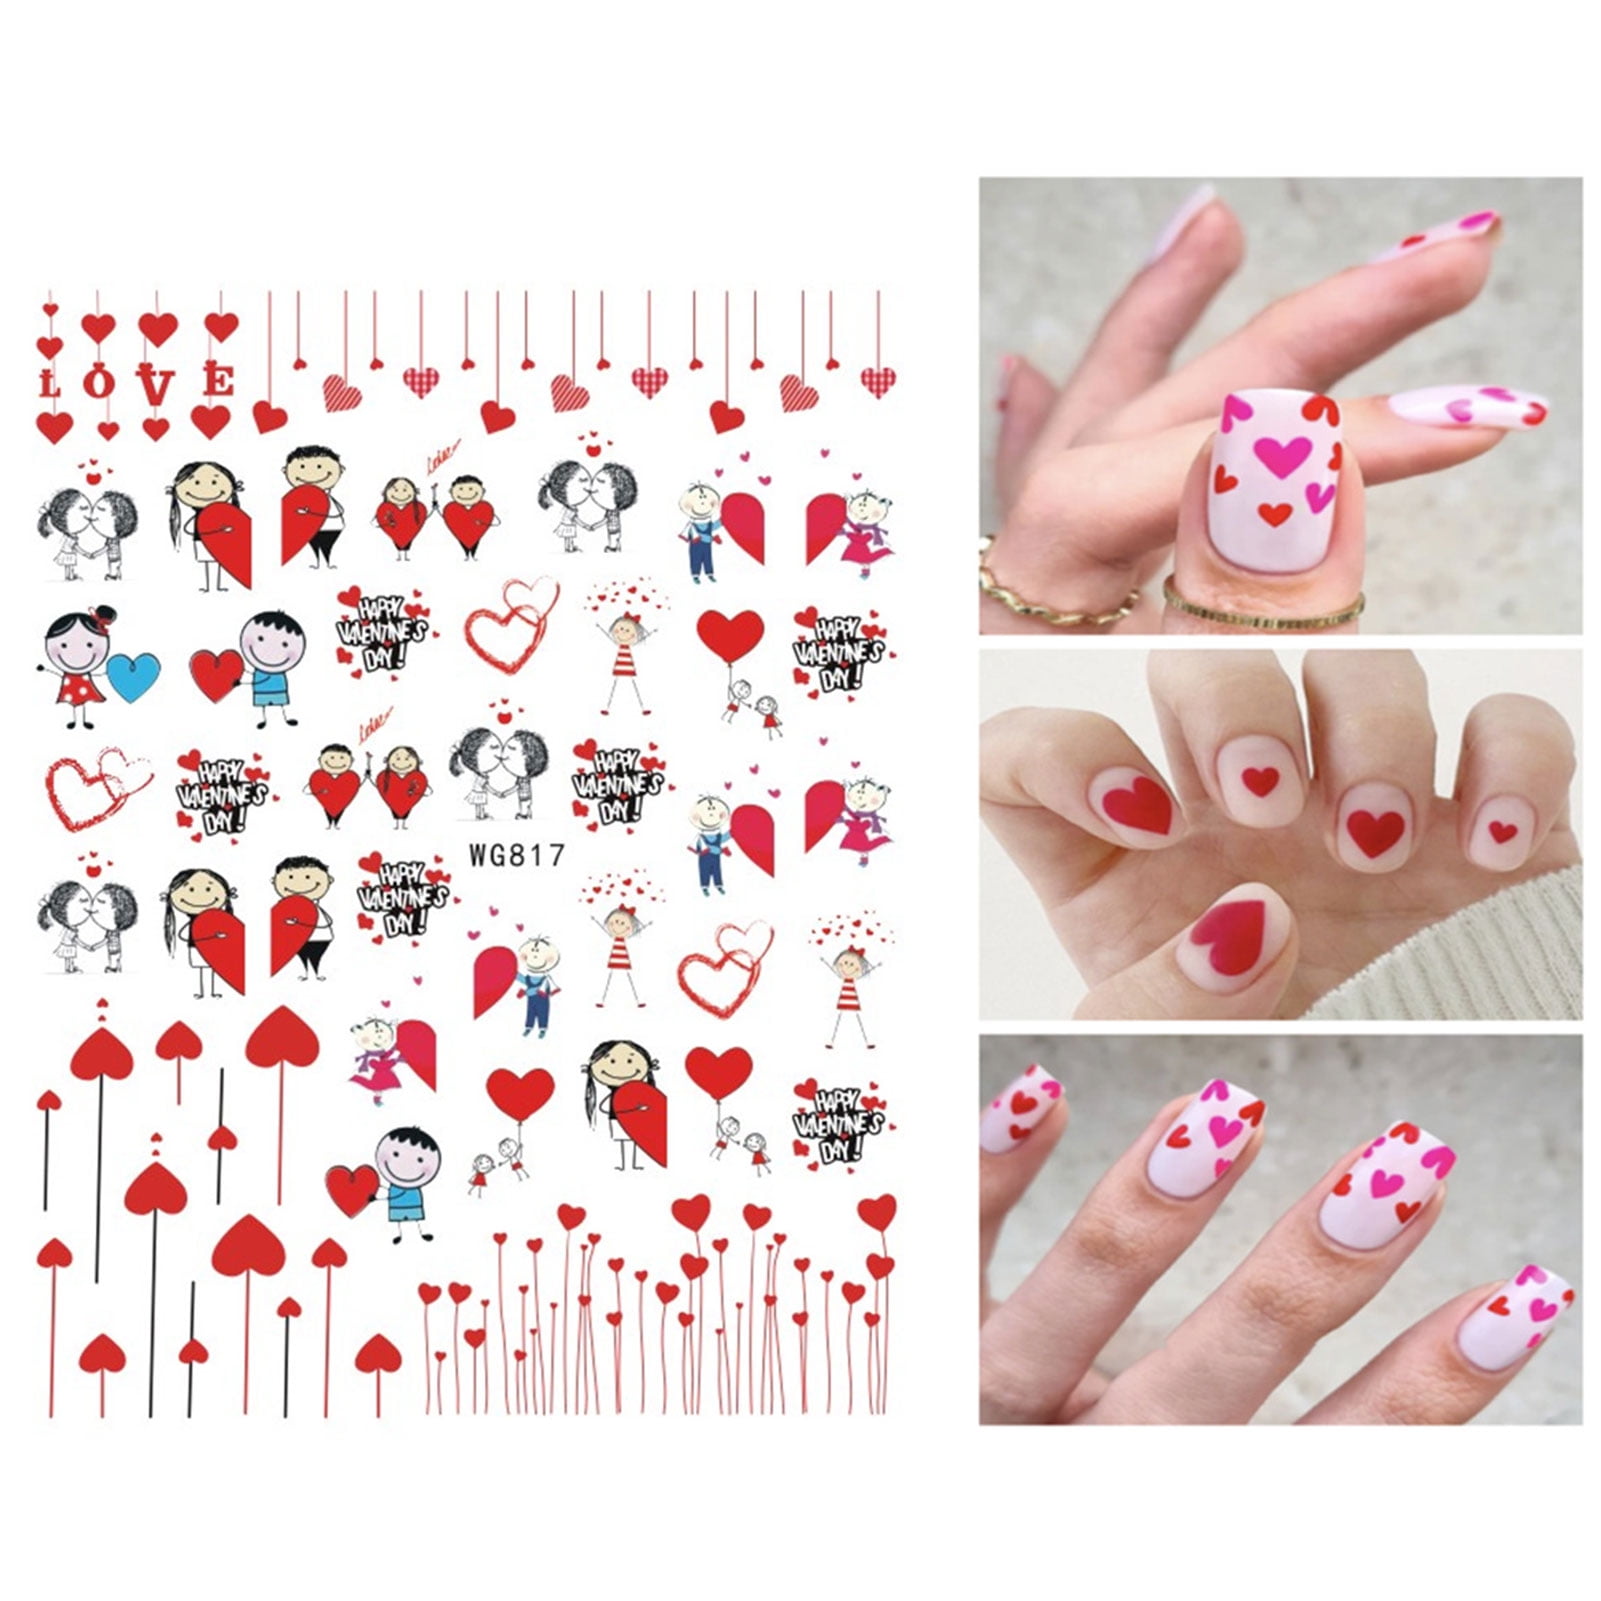  Valentine's Day Nail Art Stickers Decals 3D Self-Adhesive  Exquisite Fashion Cartoon Design Nail Decals Valentine's Day Love Heart Nail  Art Supplies Romantic Cute Valentine's Day Nail Decoration DIY Acrylic Nail  Art